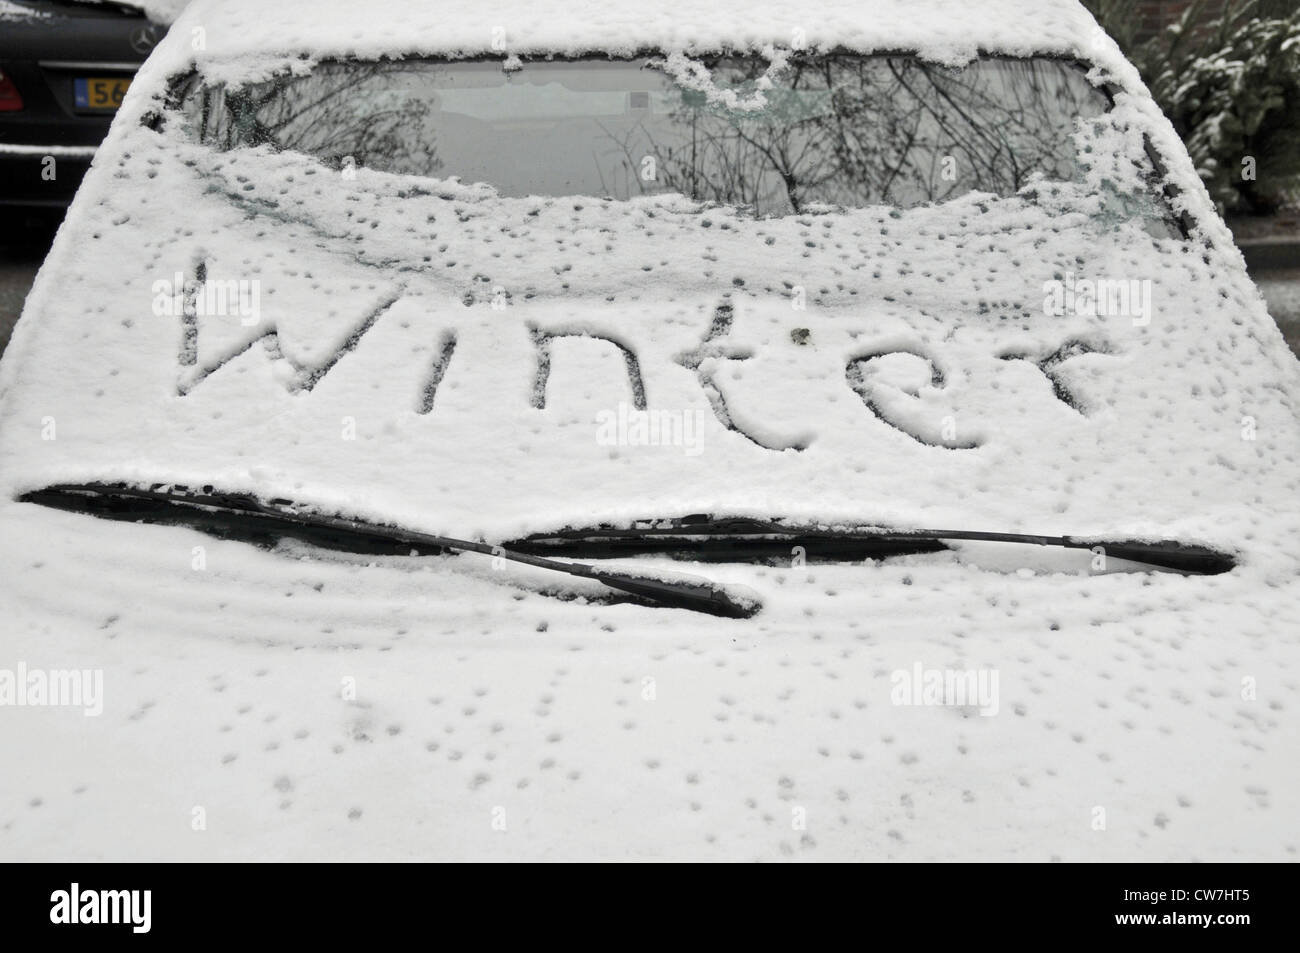 parking car in winter, somebody has written 'winter' on the snowcovered windscreen, Germany Stock Photo